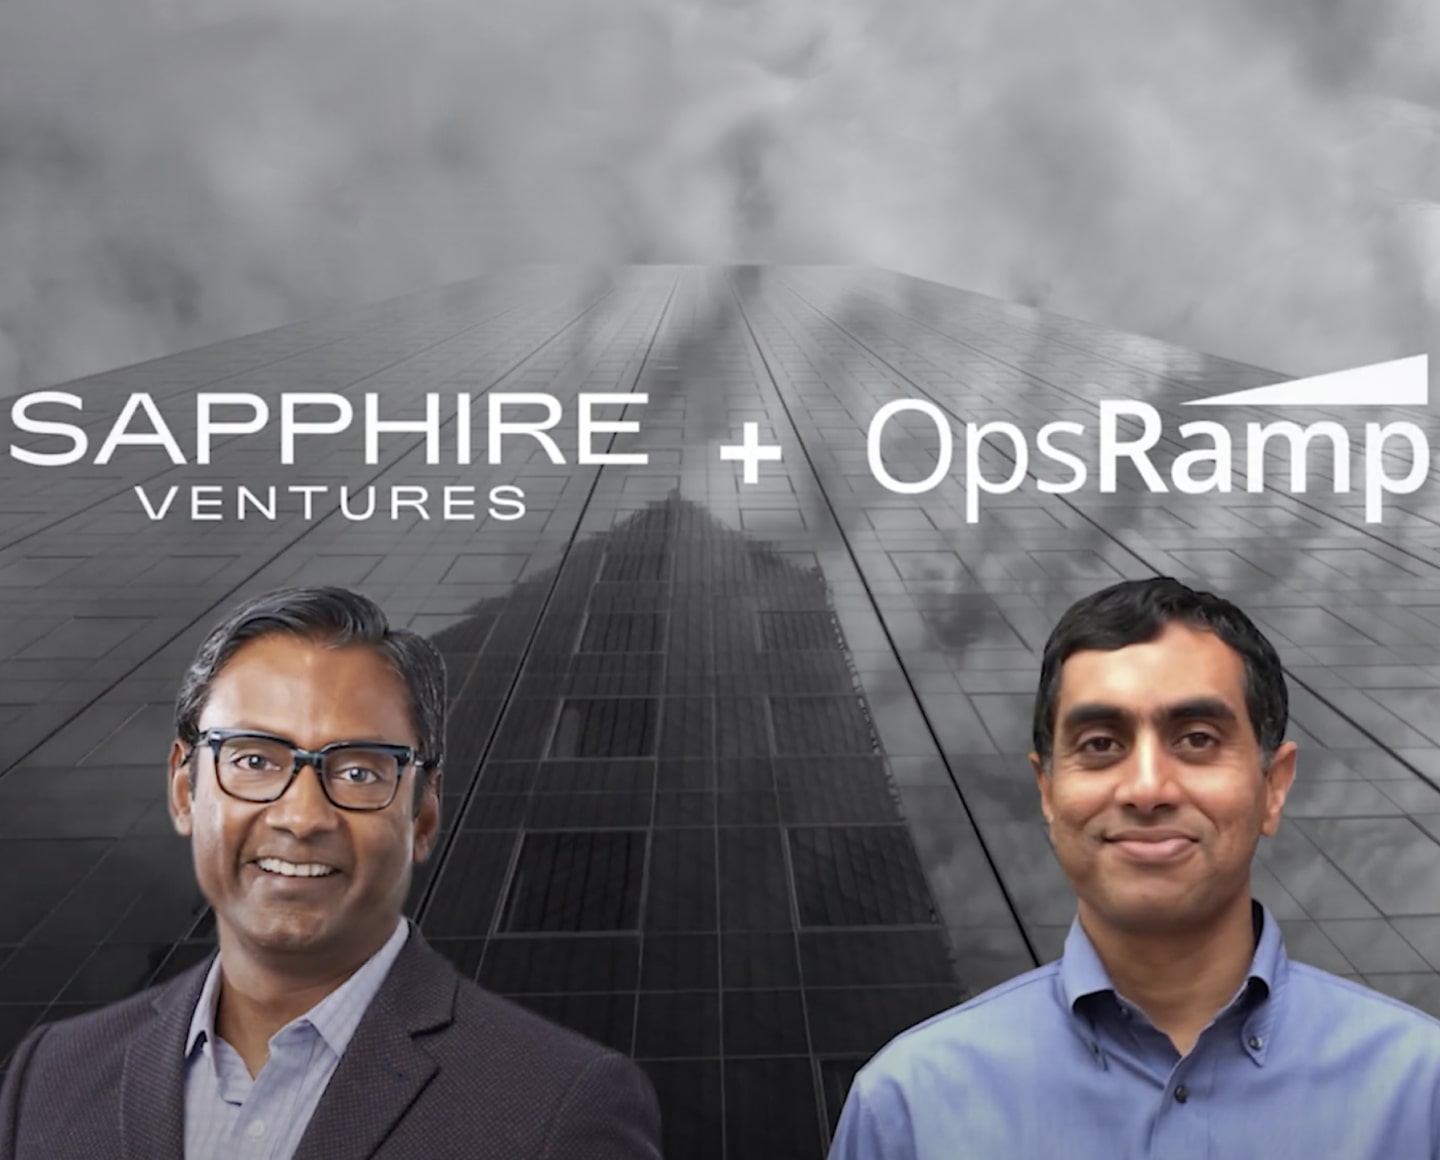 Unifying IT Operations with the Power of AI: Congratulations to OpsRamp on Joining the Hewlett Packard Enterprise (HPE) Family